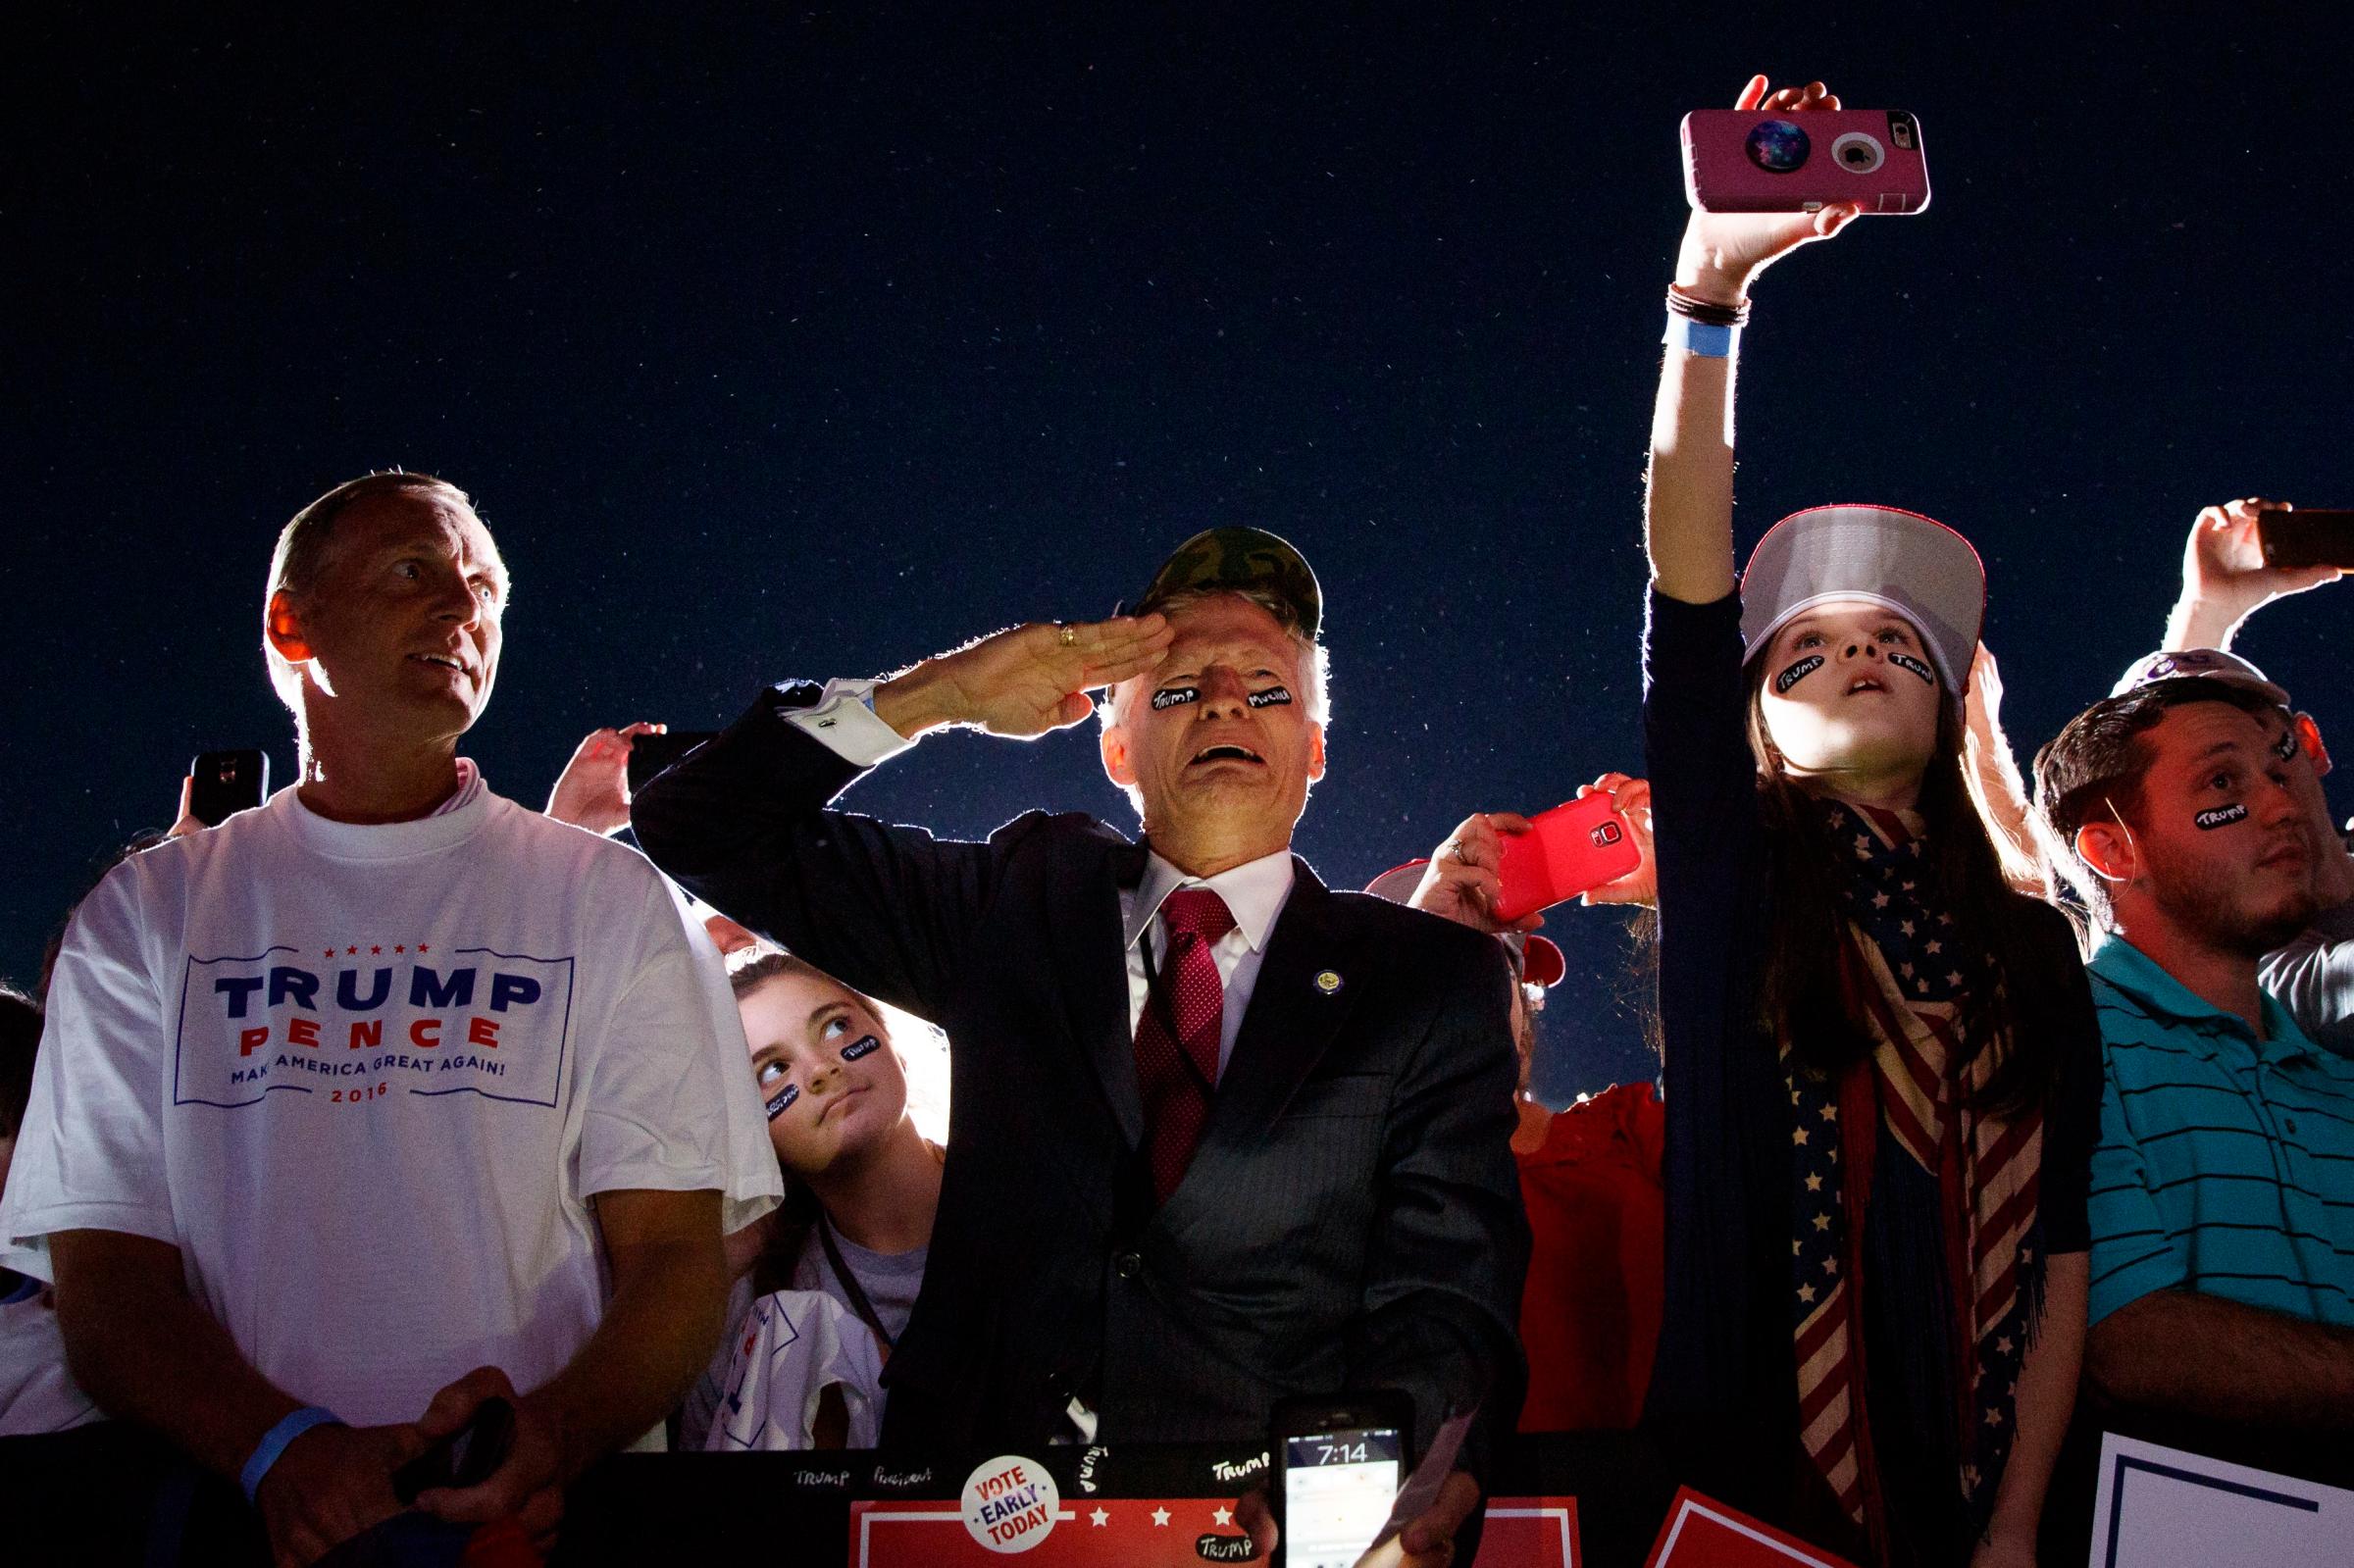 Jeff Muller of Wilmington, N.C., salutes as Donald Trump arrives at a campaign rally in Kinston, N.C., on Oct. 26, 2016.